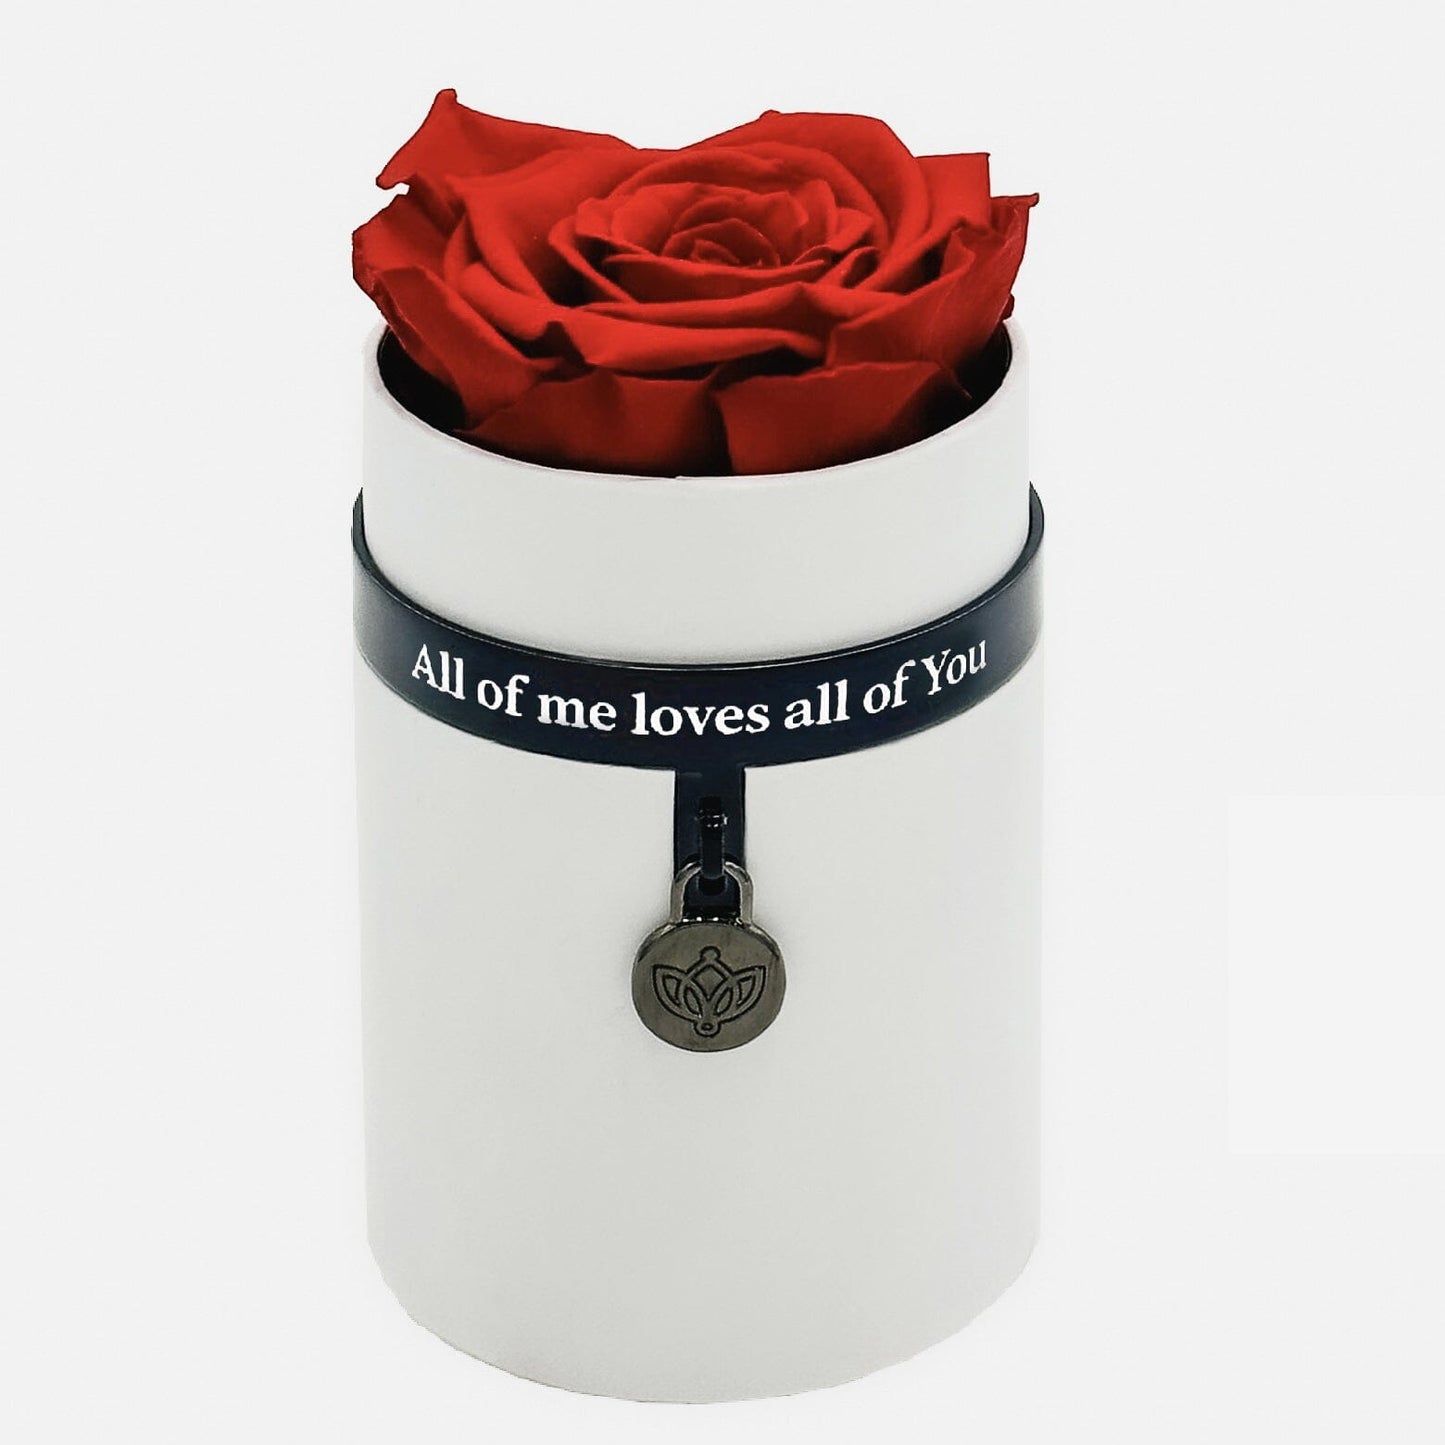 One in a Million™ Round White Box | All of me loves all of You | Red Rose